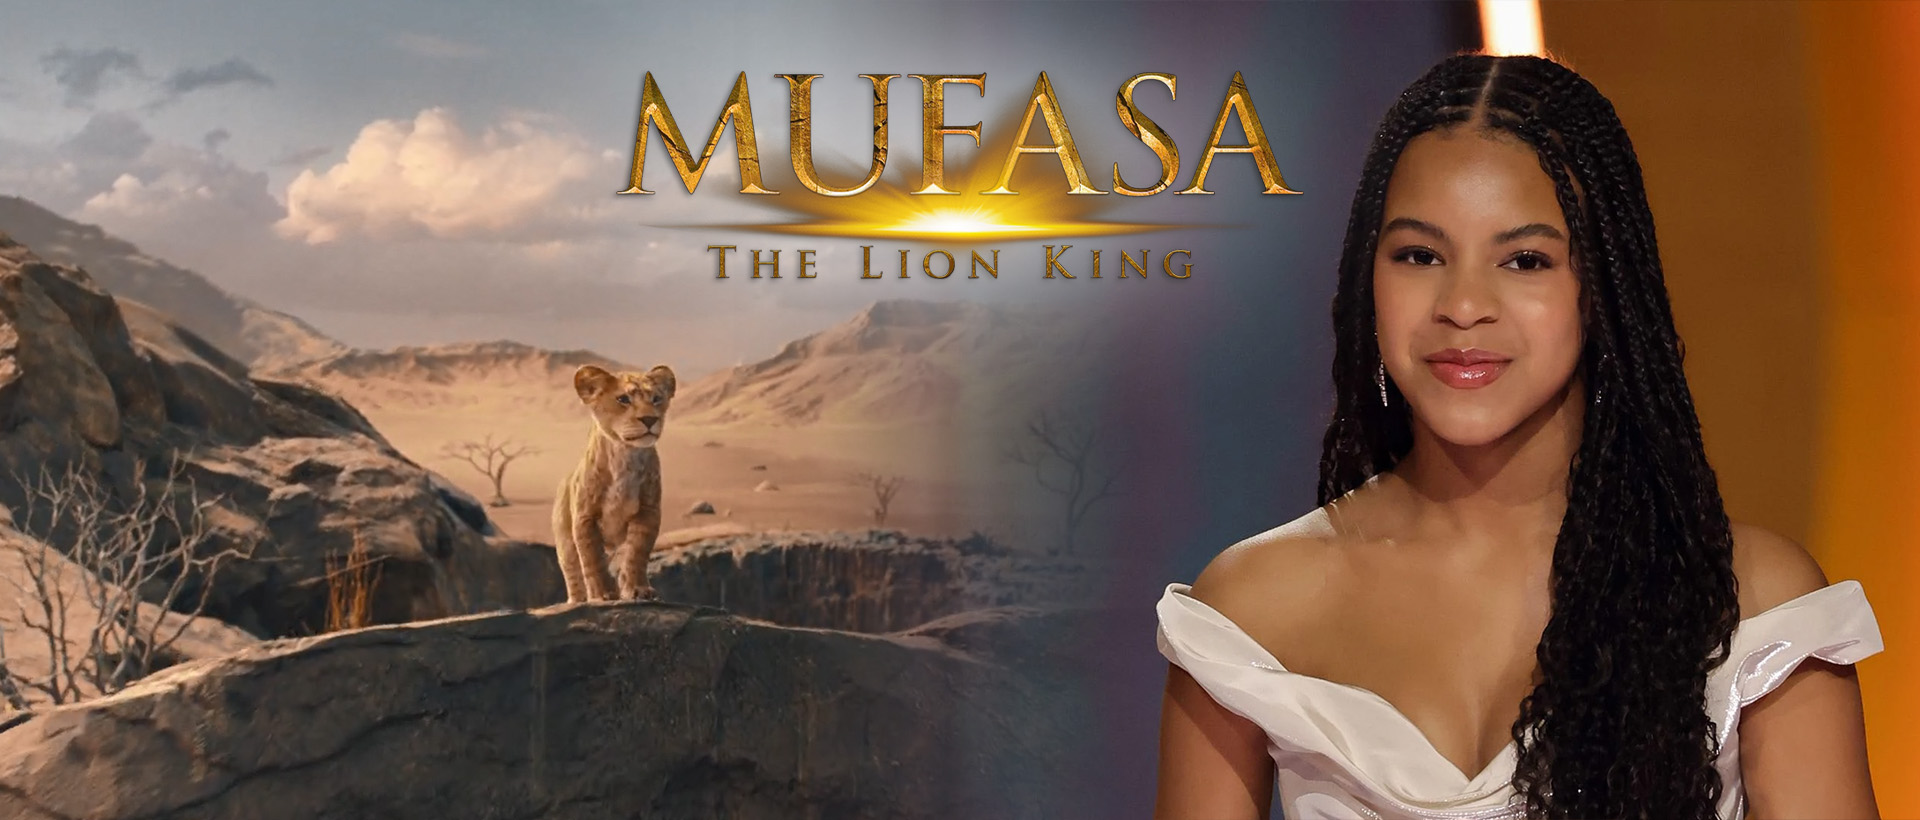 mufasa the lion king blue ivy carter banner